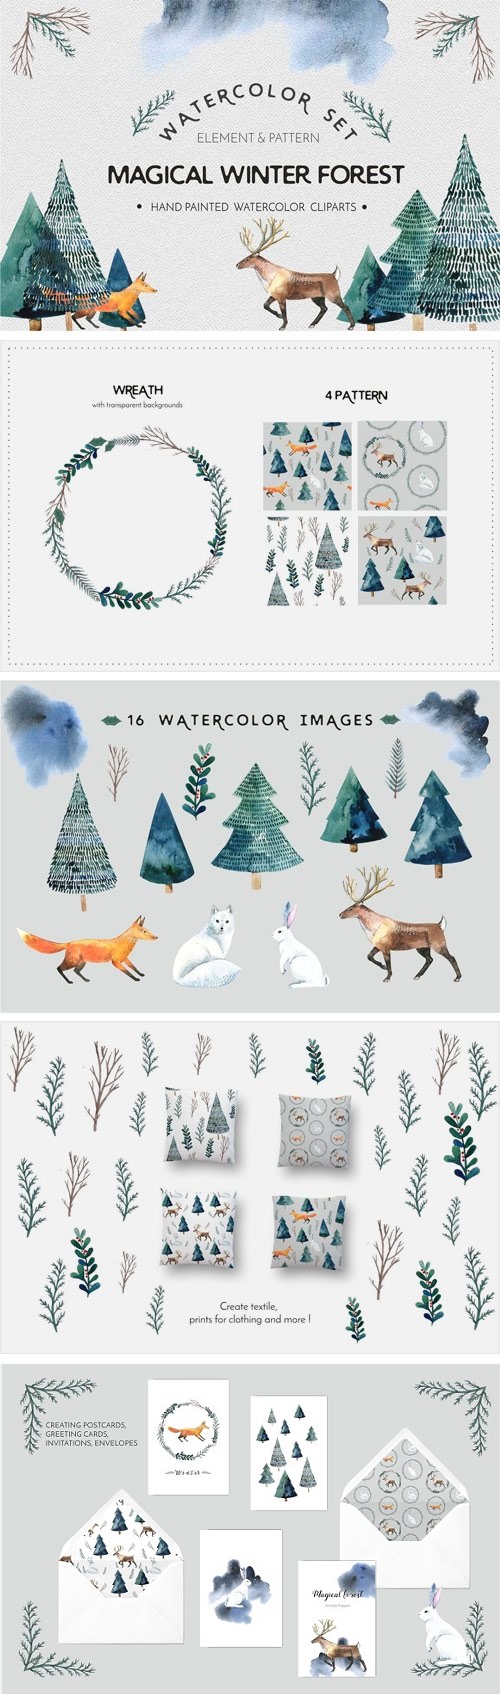 Watercolor Set Magical Winter Forest 1921010